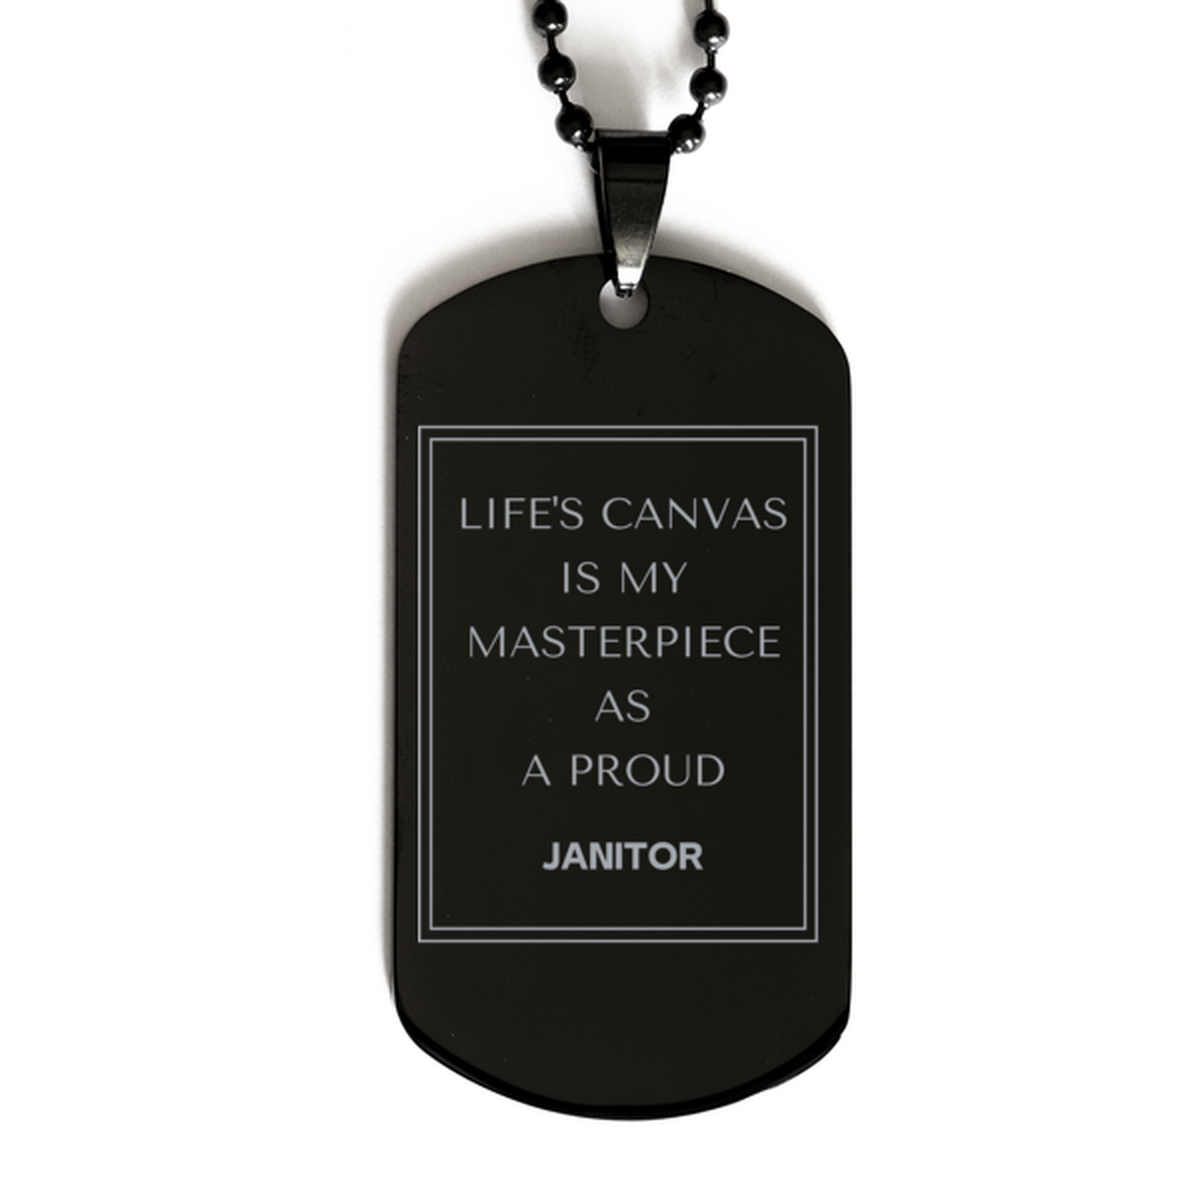 Proud Janitor Gifts, Life's canvas is my masterpiece, Epic Birthday Christmas Unique Black Dog Tag For Janitor, Coworkers, Men, Women, Friends